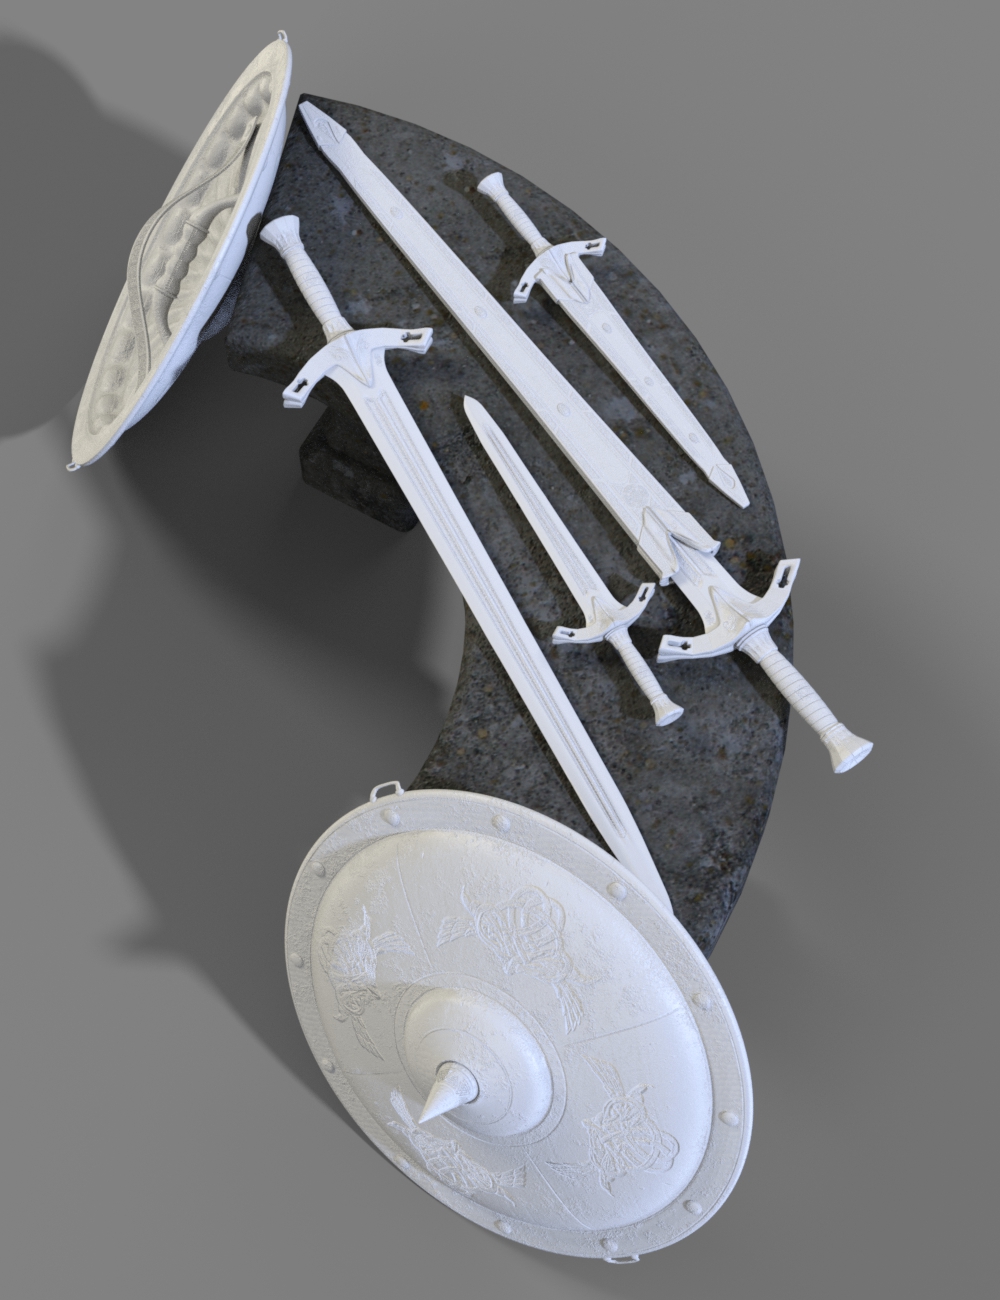 Medieval Fantasy Weapons by: Britech, 3D Models by Daz 3D